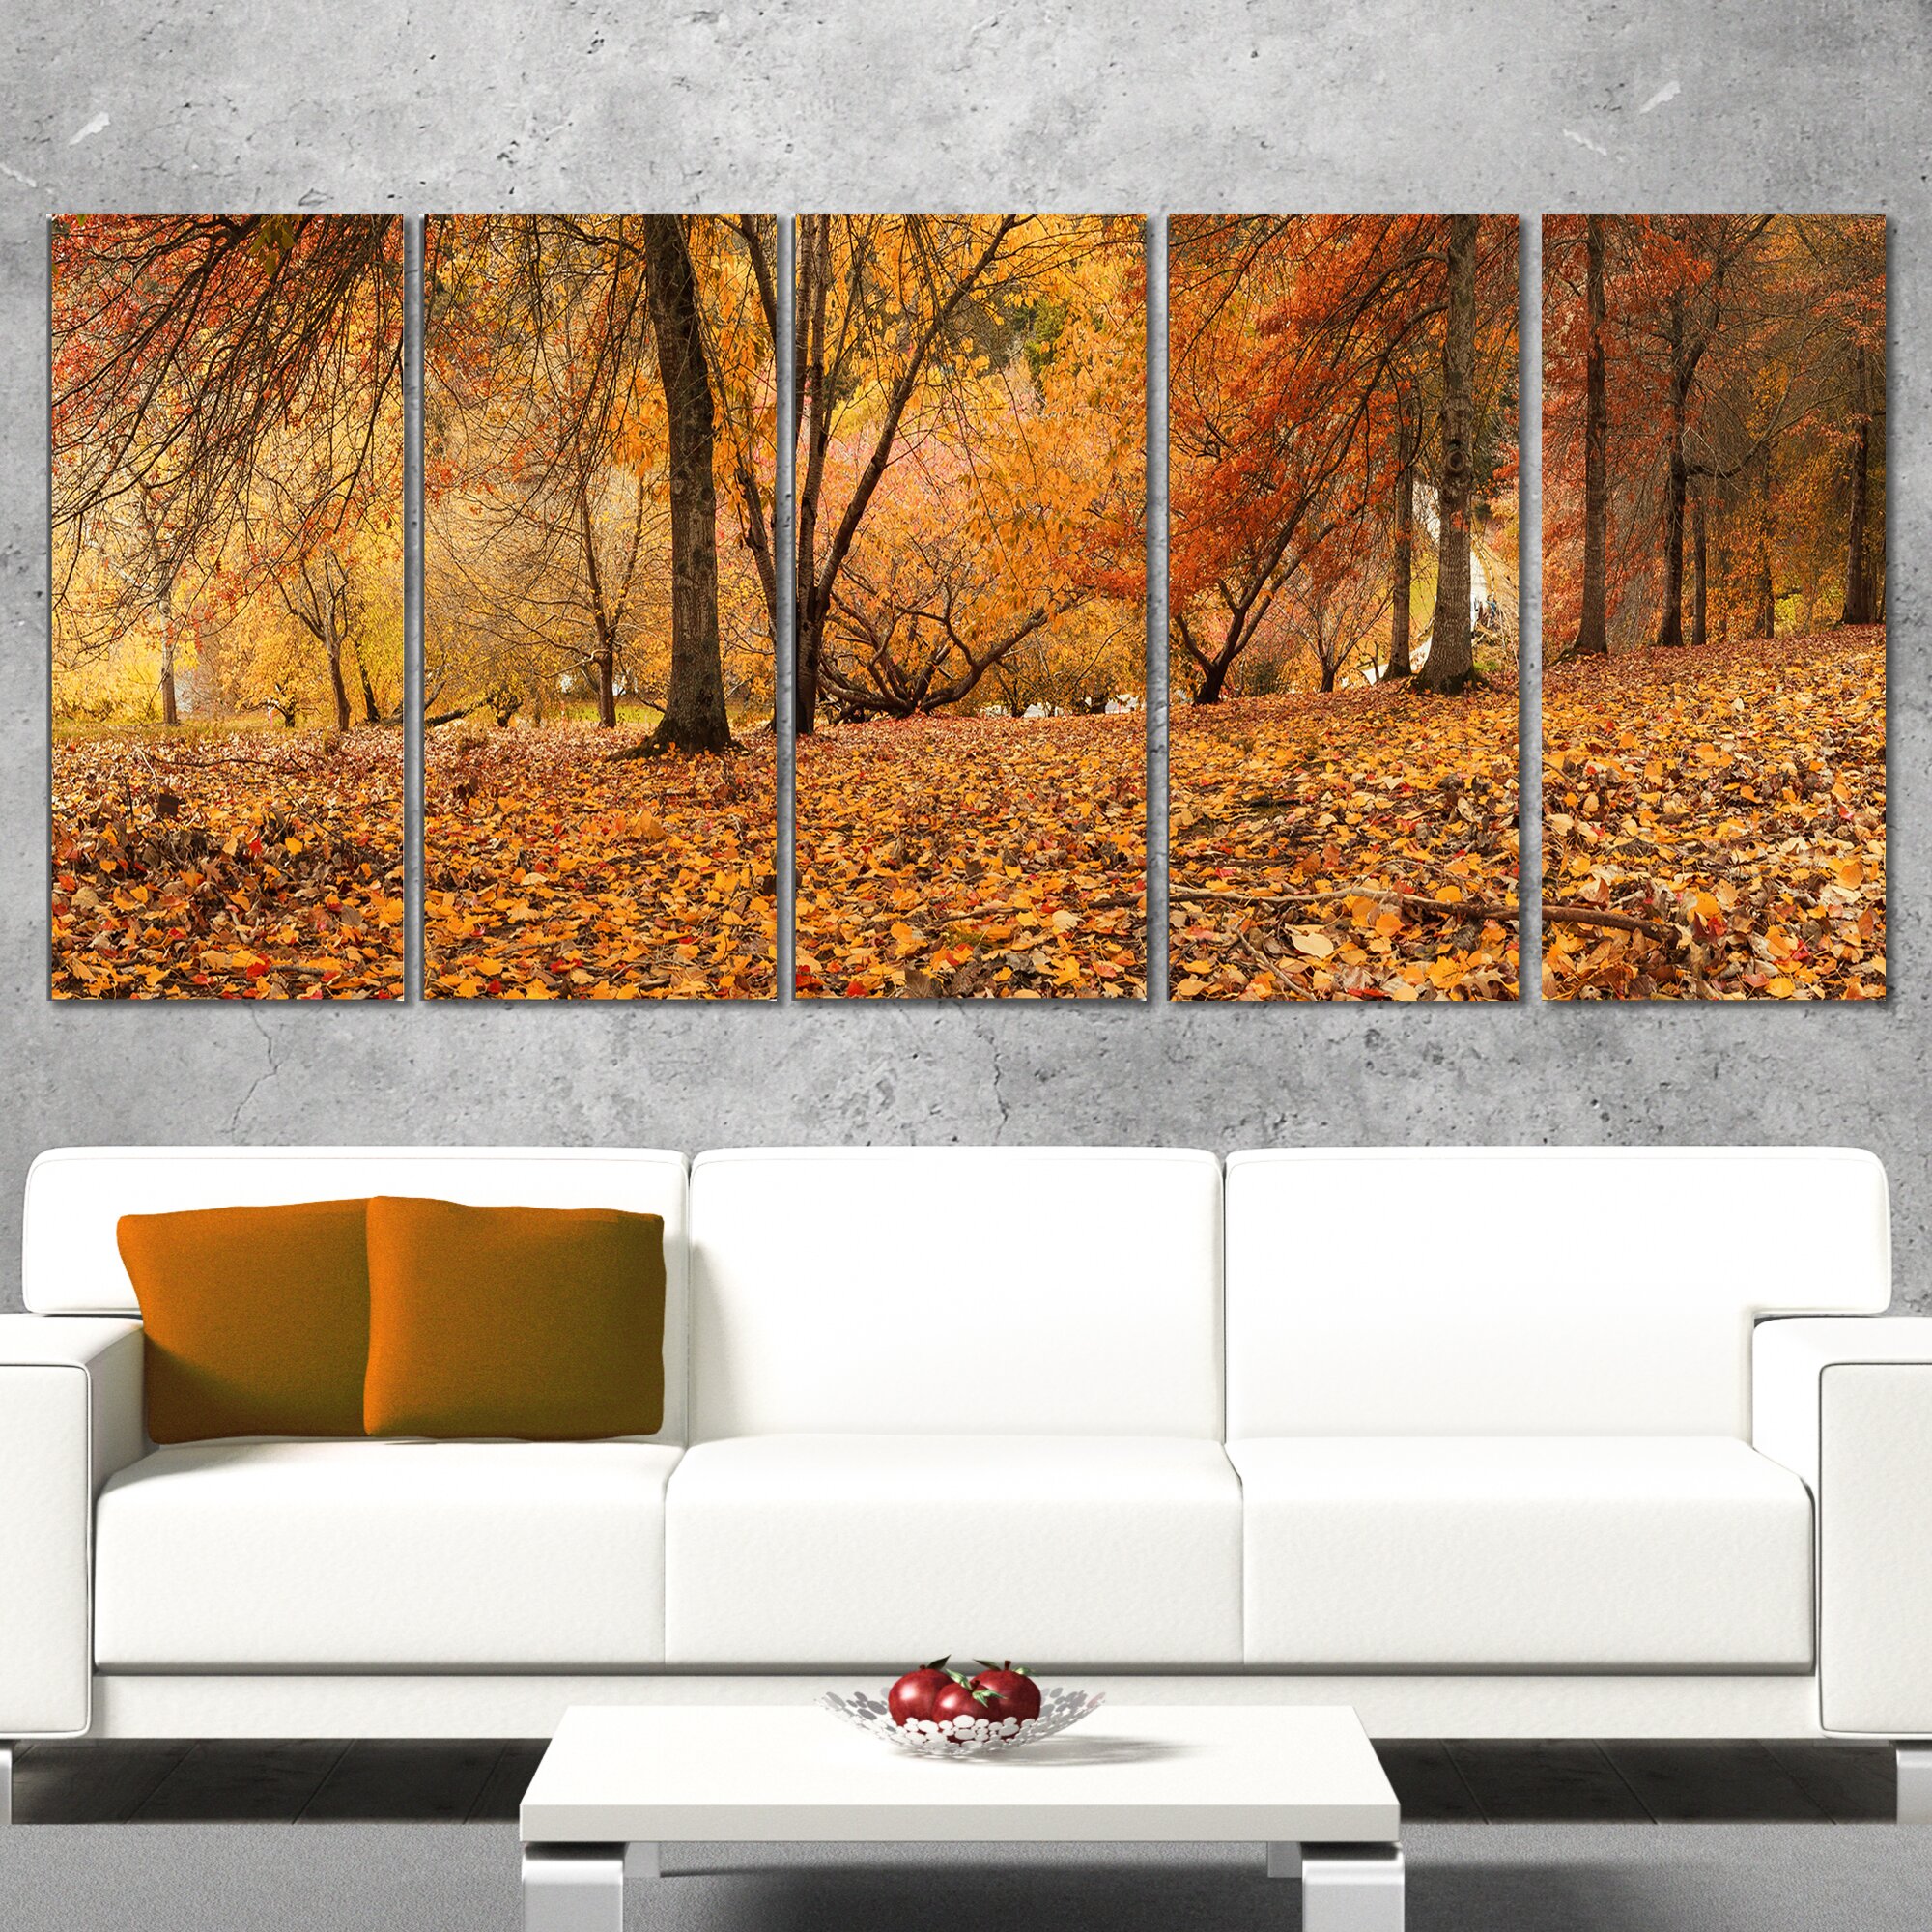 DesignArt Brown Autumn Panorama 5 Piece Wall Art on Wrapped Canvas Set ...